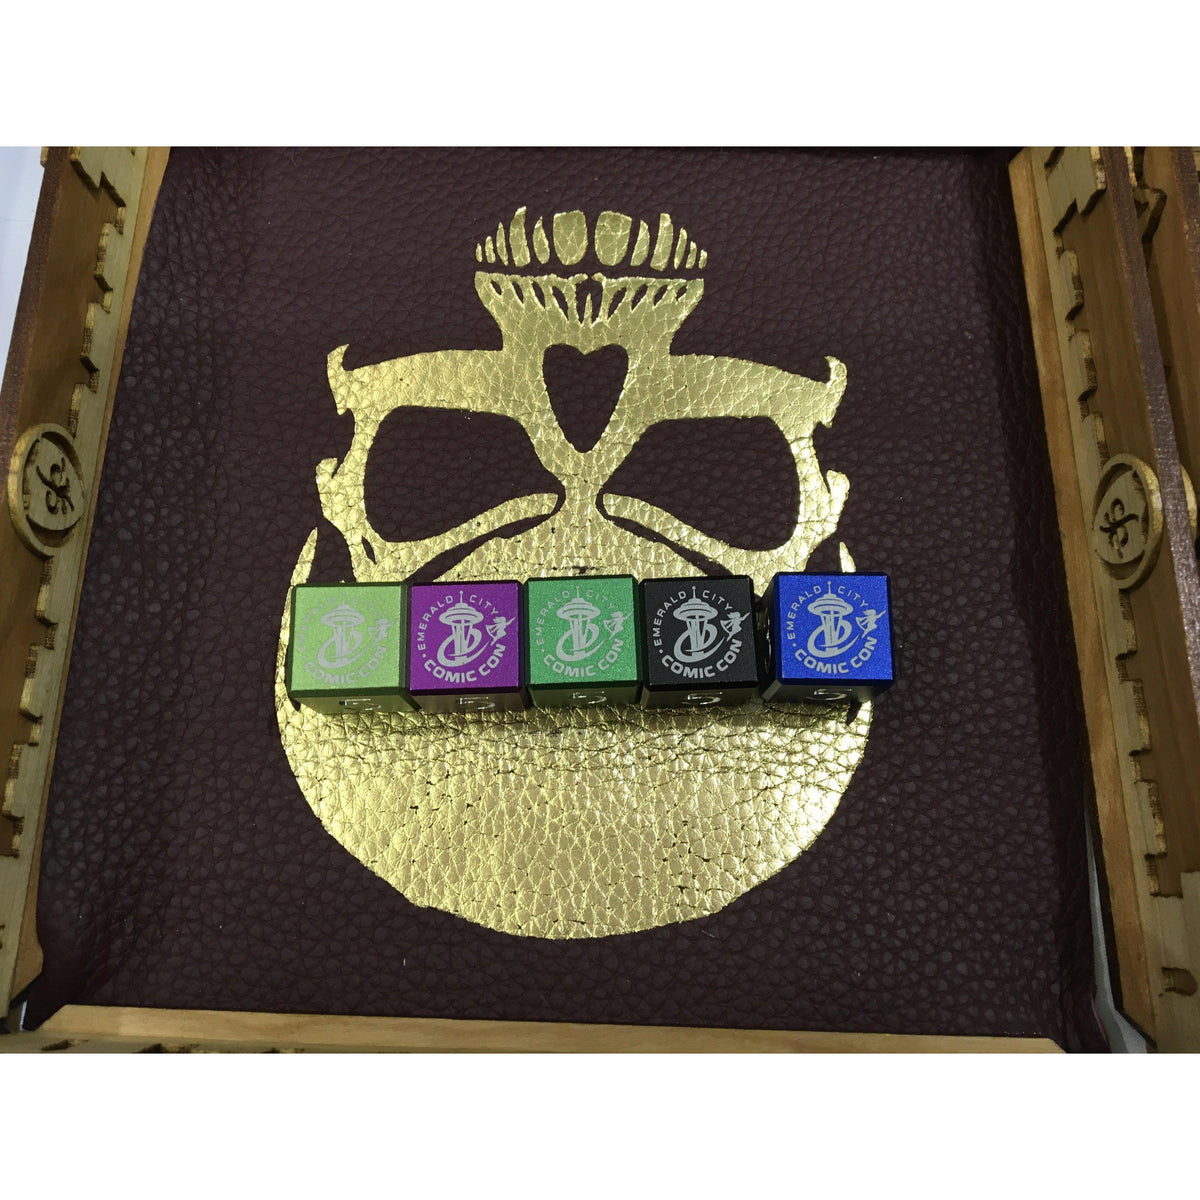 Emerald City Comic Con Dice-Norse Foundry-DND Dice-Polyhedral Dice-D20-Metal Dice-Precision Dice-Luxury Dice-Dungeons and Dragons-D&amp;D-